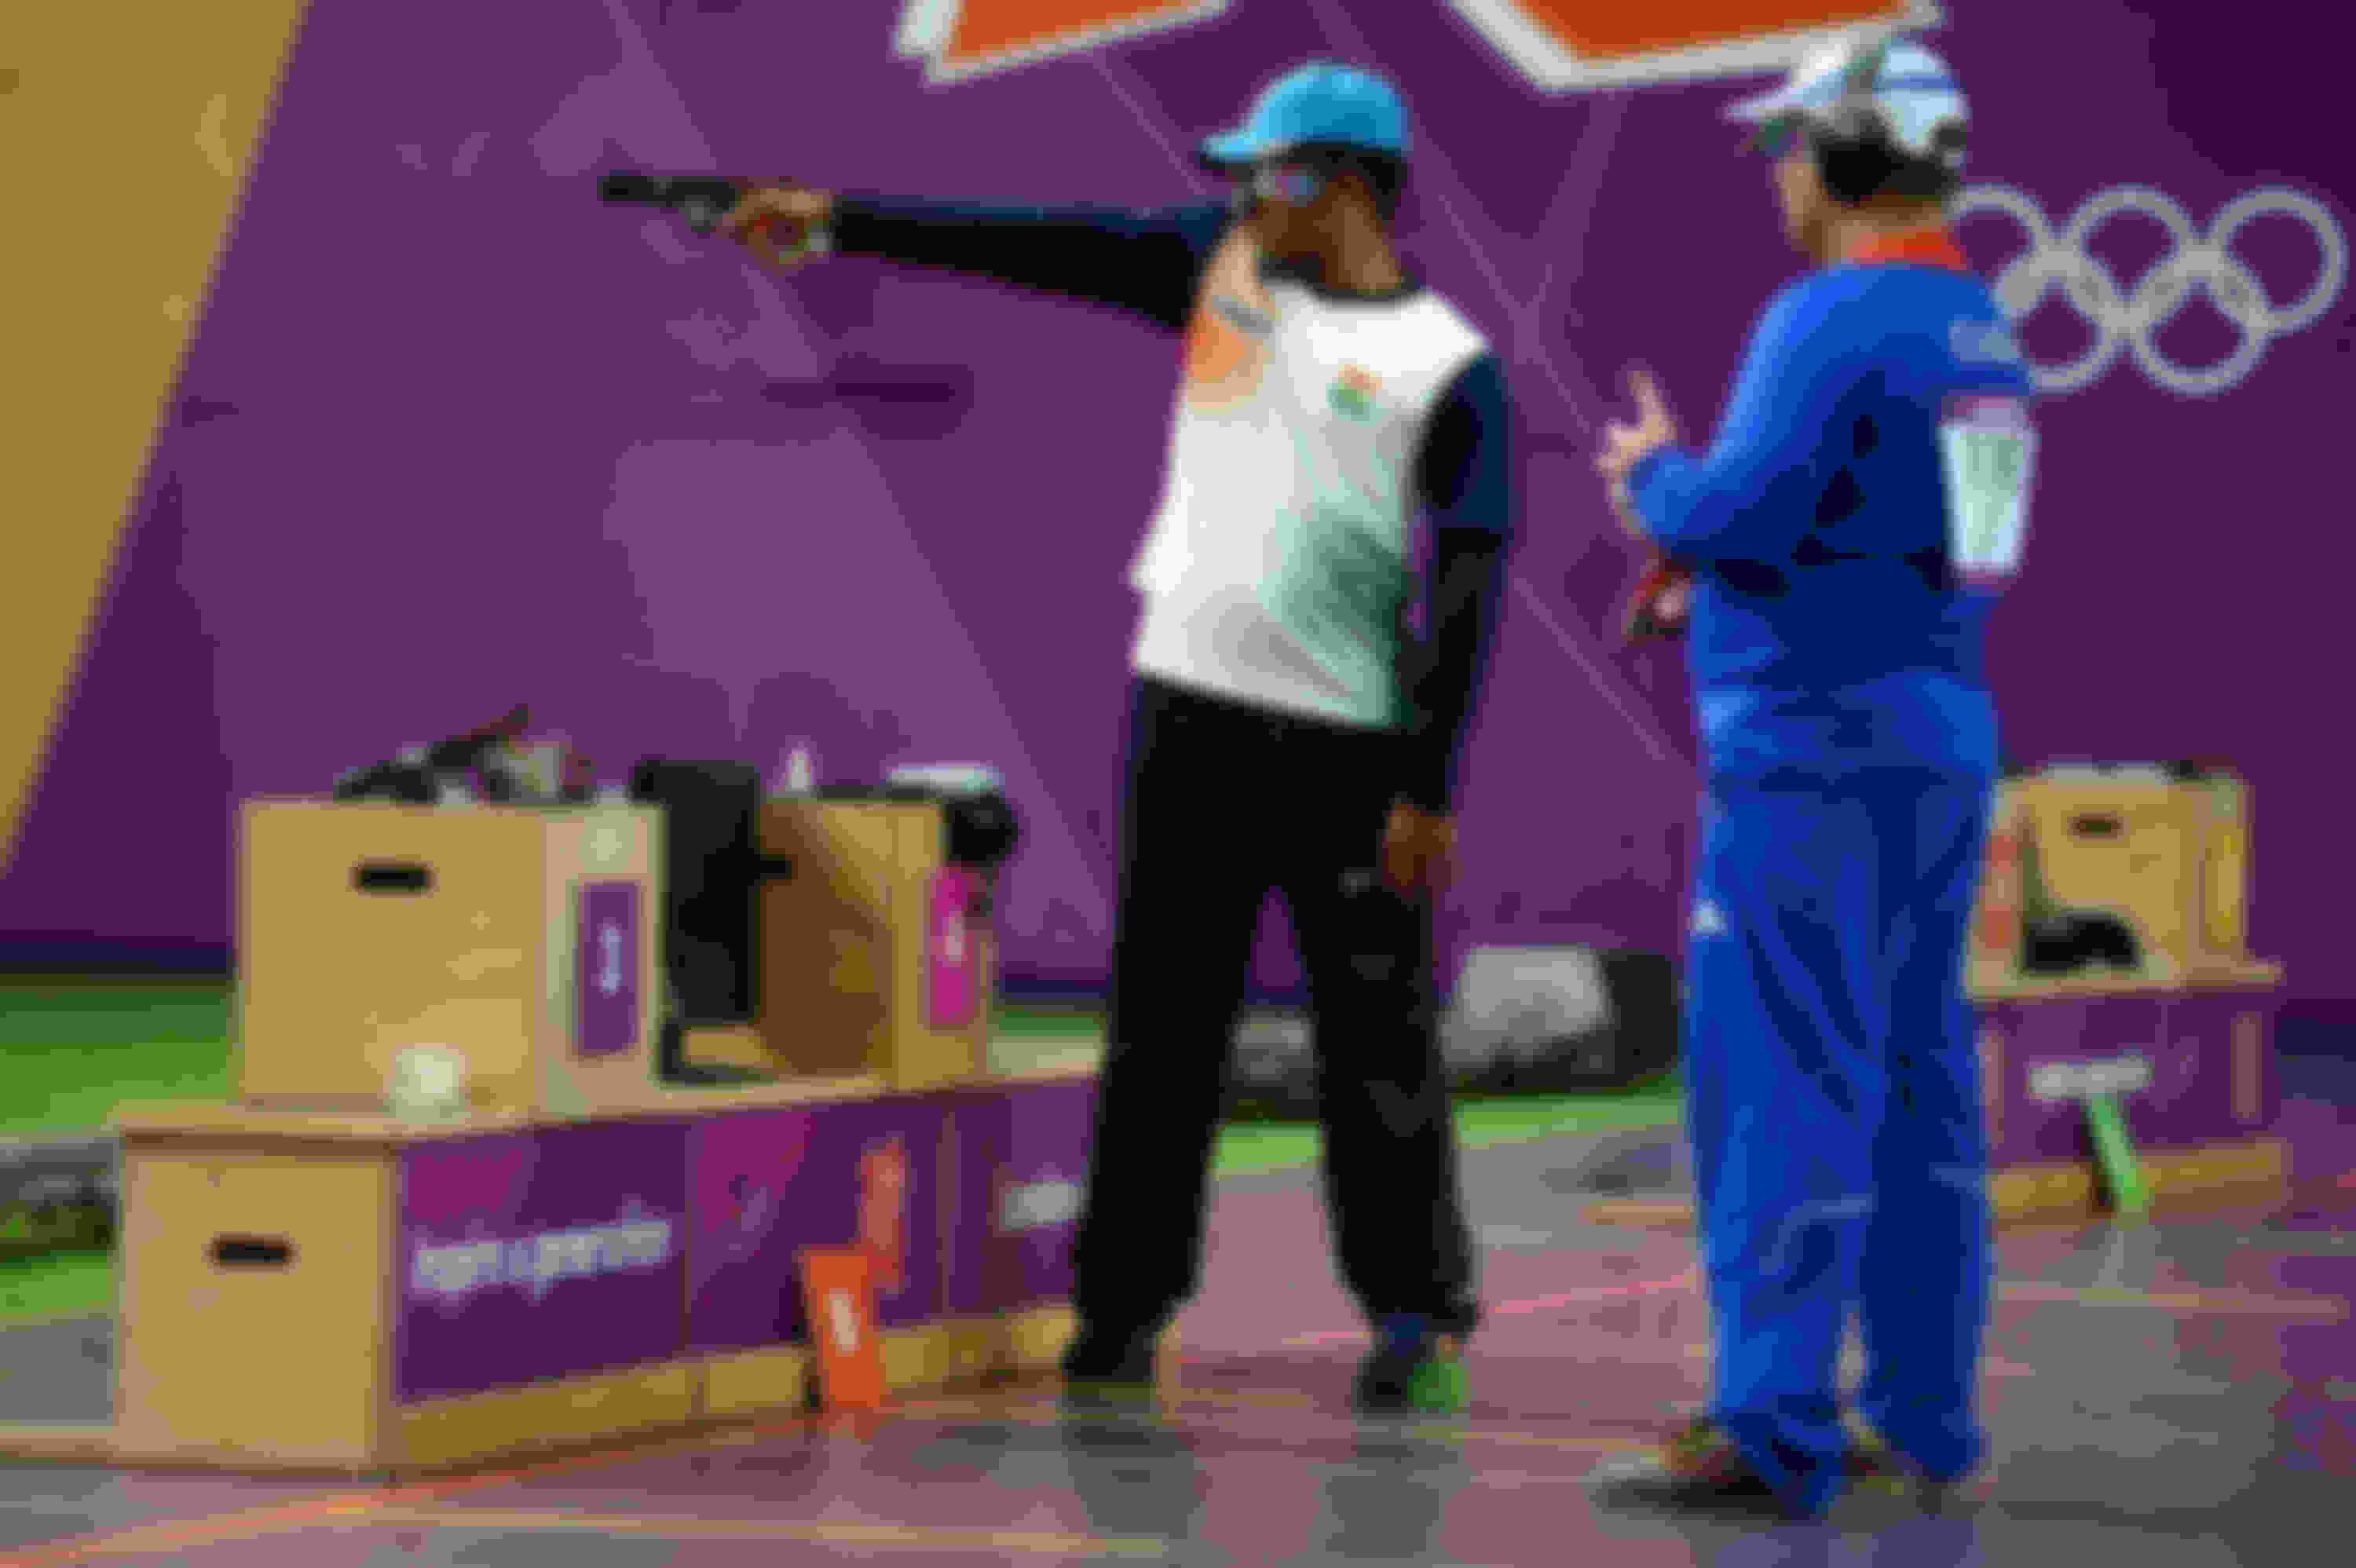 Vijay Kumar (L) of India and Leuris Pupo of Cuba compete in the men's 25m rapid fire pistol shooting final at the London 2012 Olympics.